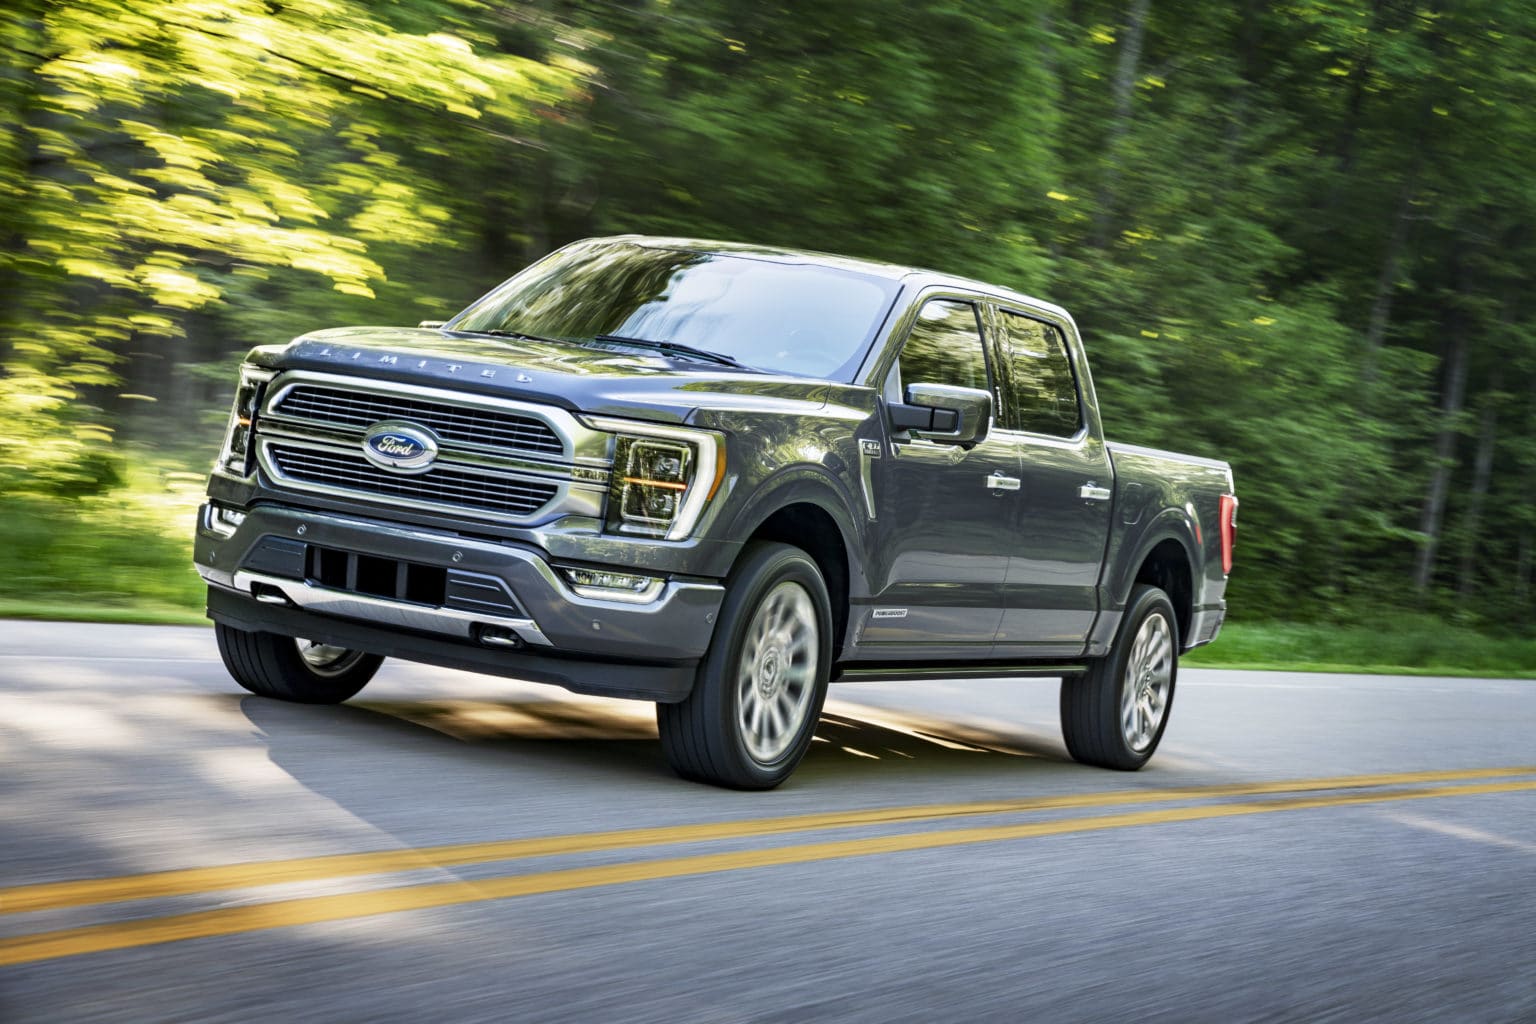 Ford F-150 a pleasure to drive every day